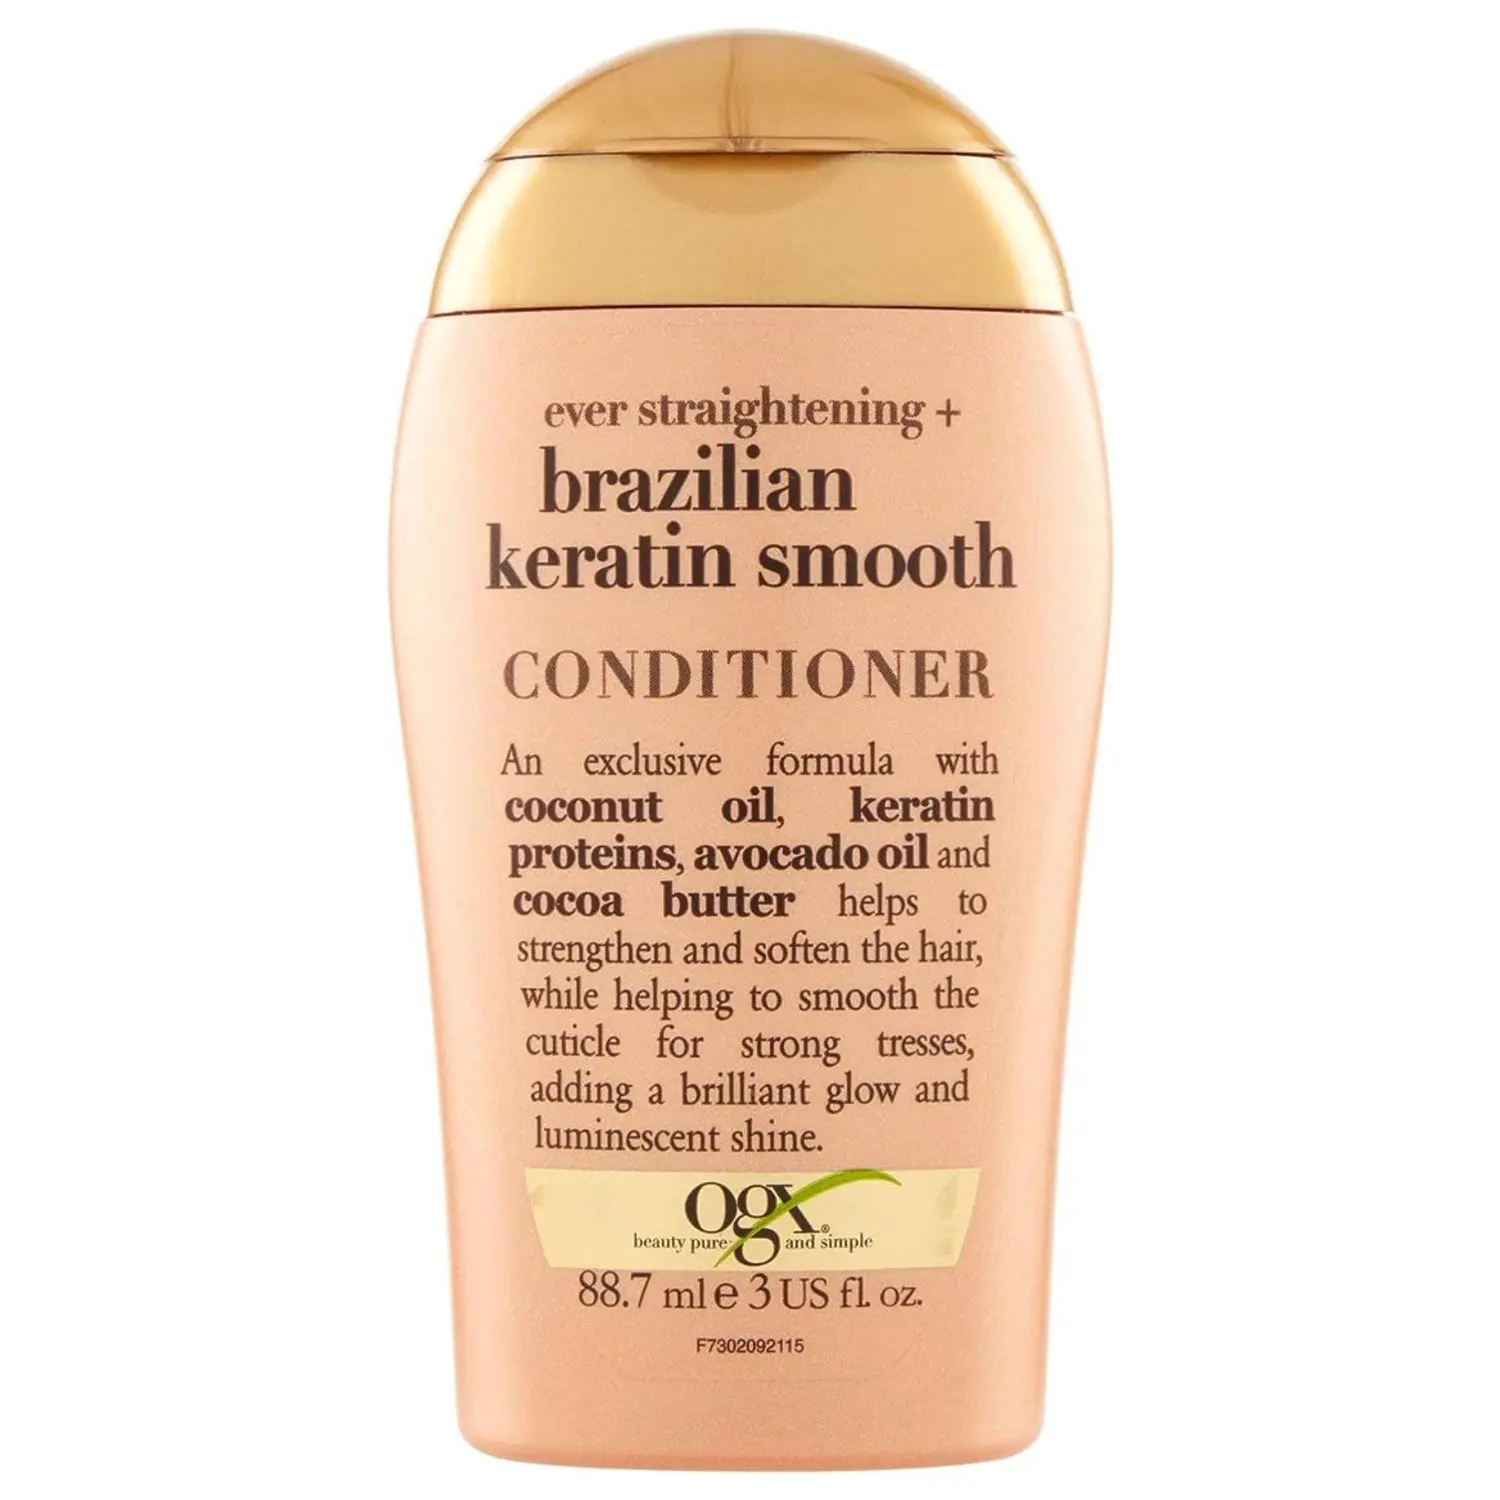 OGX Ever Straightening Brazilian Keratin Smooth Conditioner | Coconut Oil, Keratin Proteins, Avocado Oil & Cocoa Butter, For Dry, Curly, Frizzy, Fine Hair Sulfate Parabens Free, 88.7ml